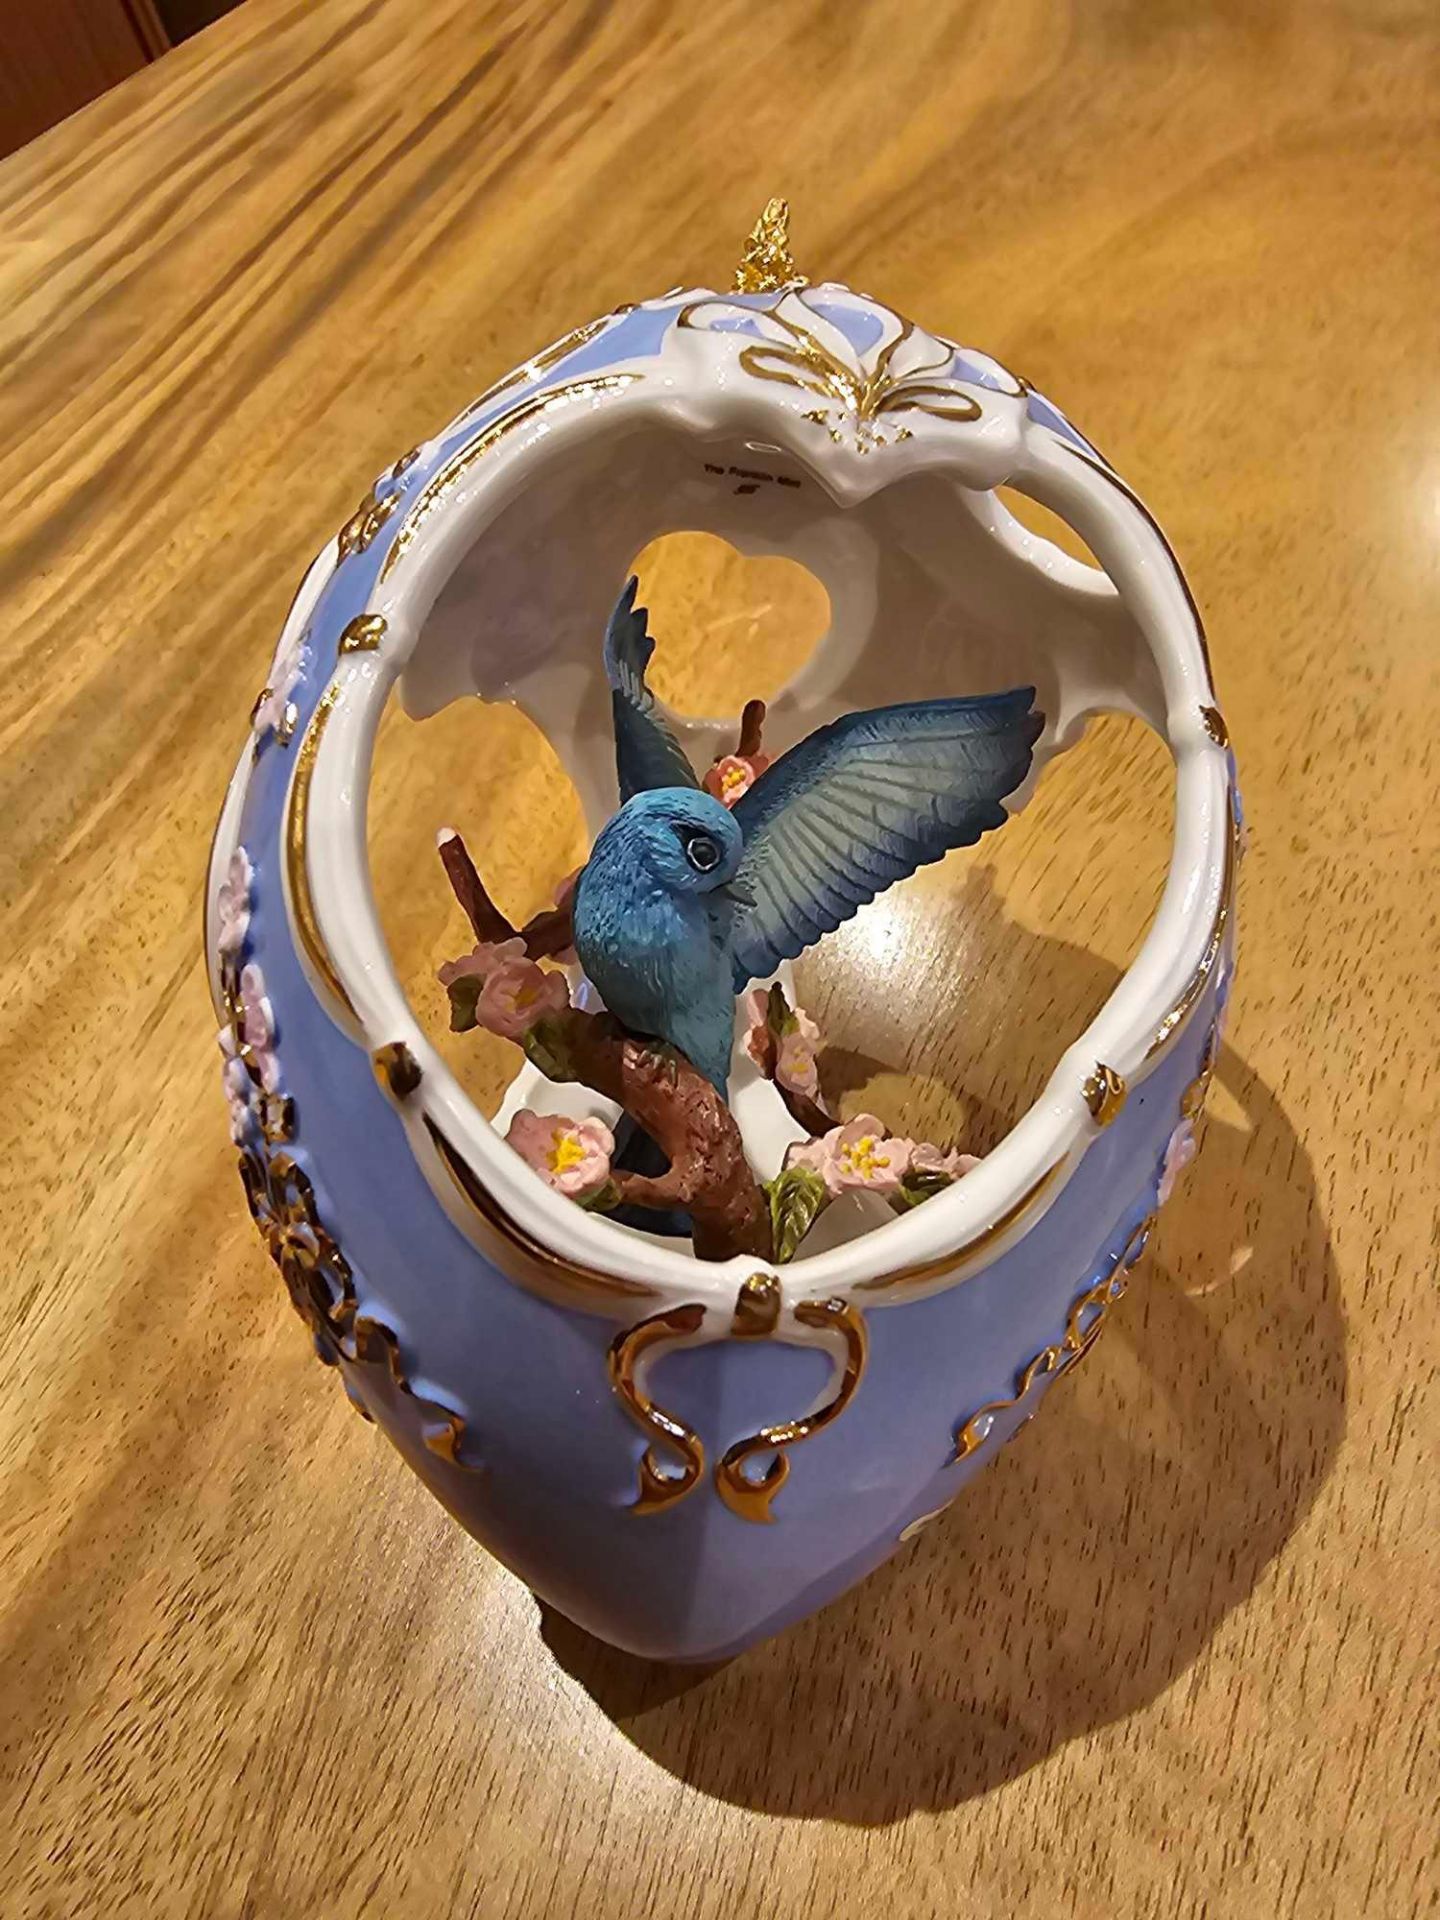 Franklin Mint, House Of Faberge - Faberge Egg - Birds Of The World Blue Egg With Bird - Porcelain,